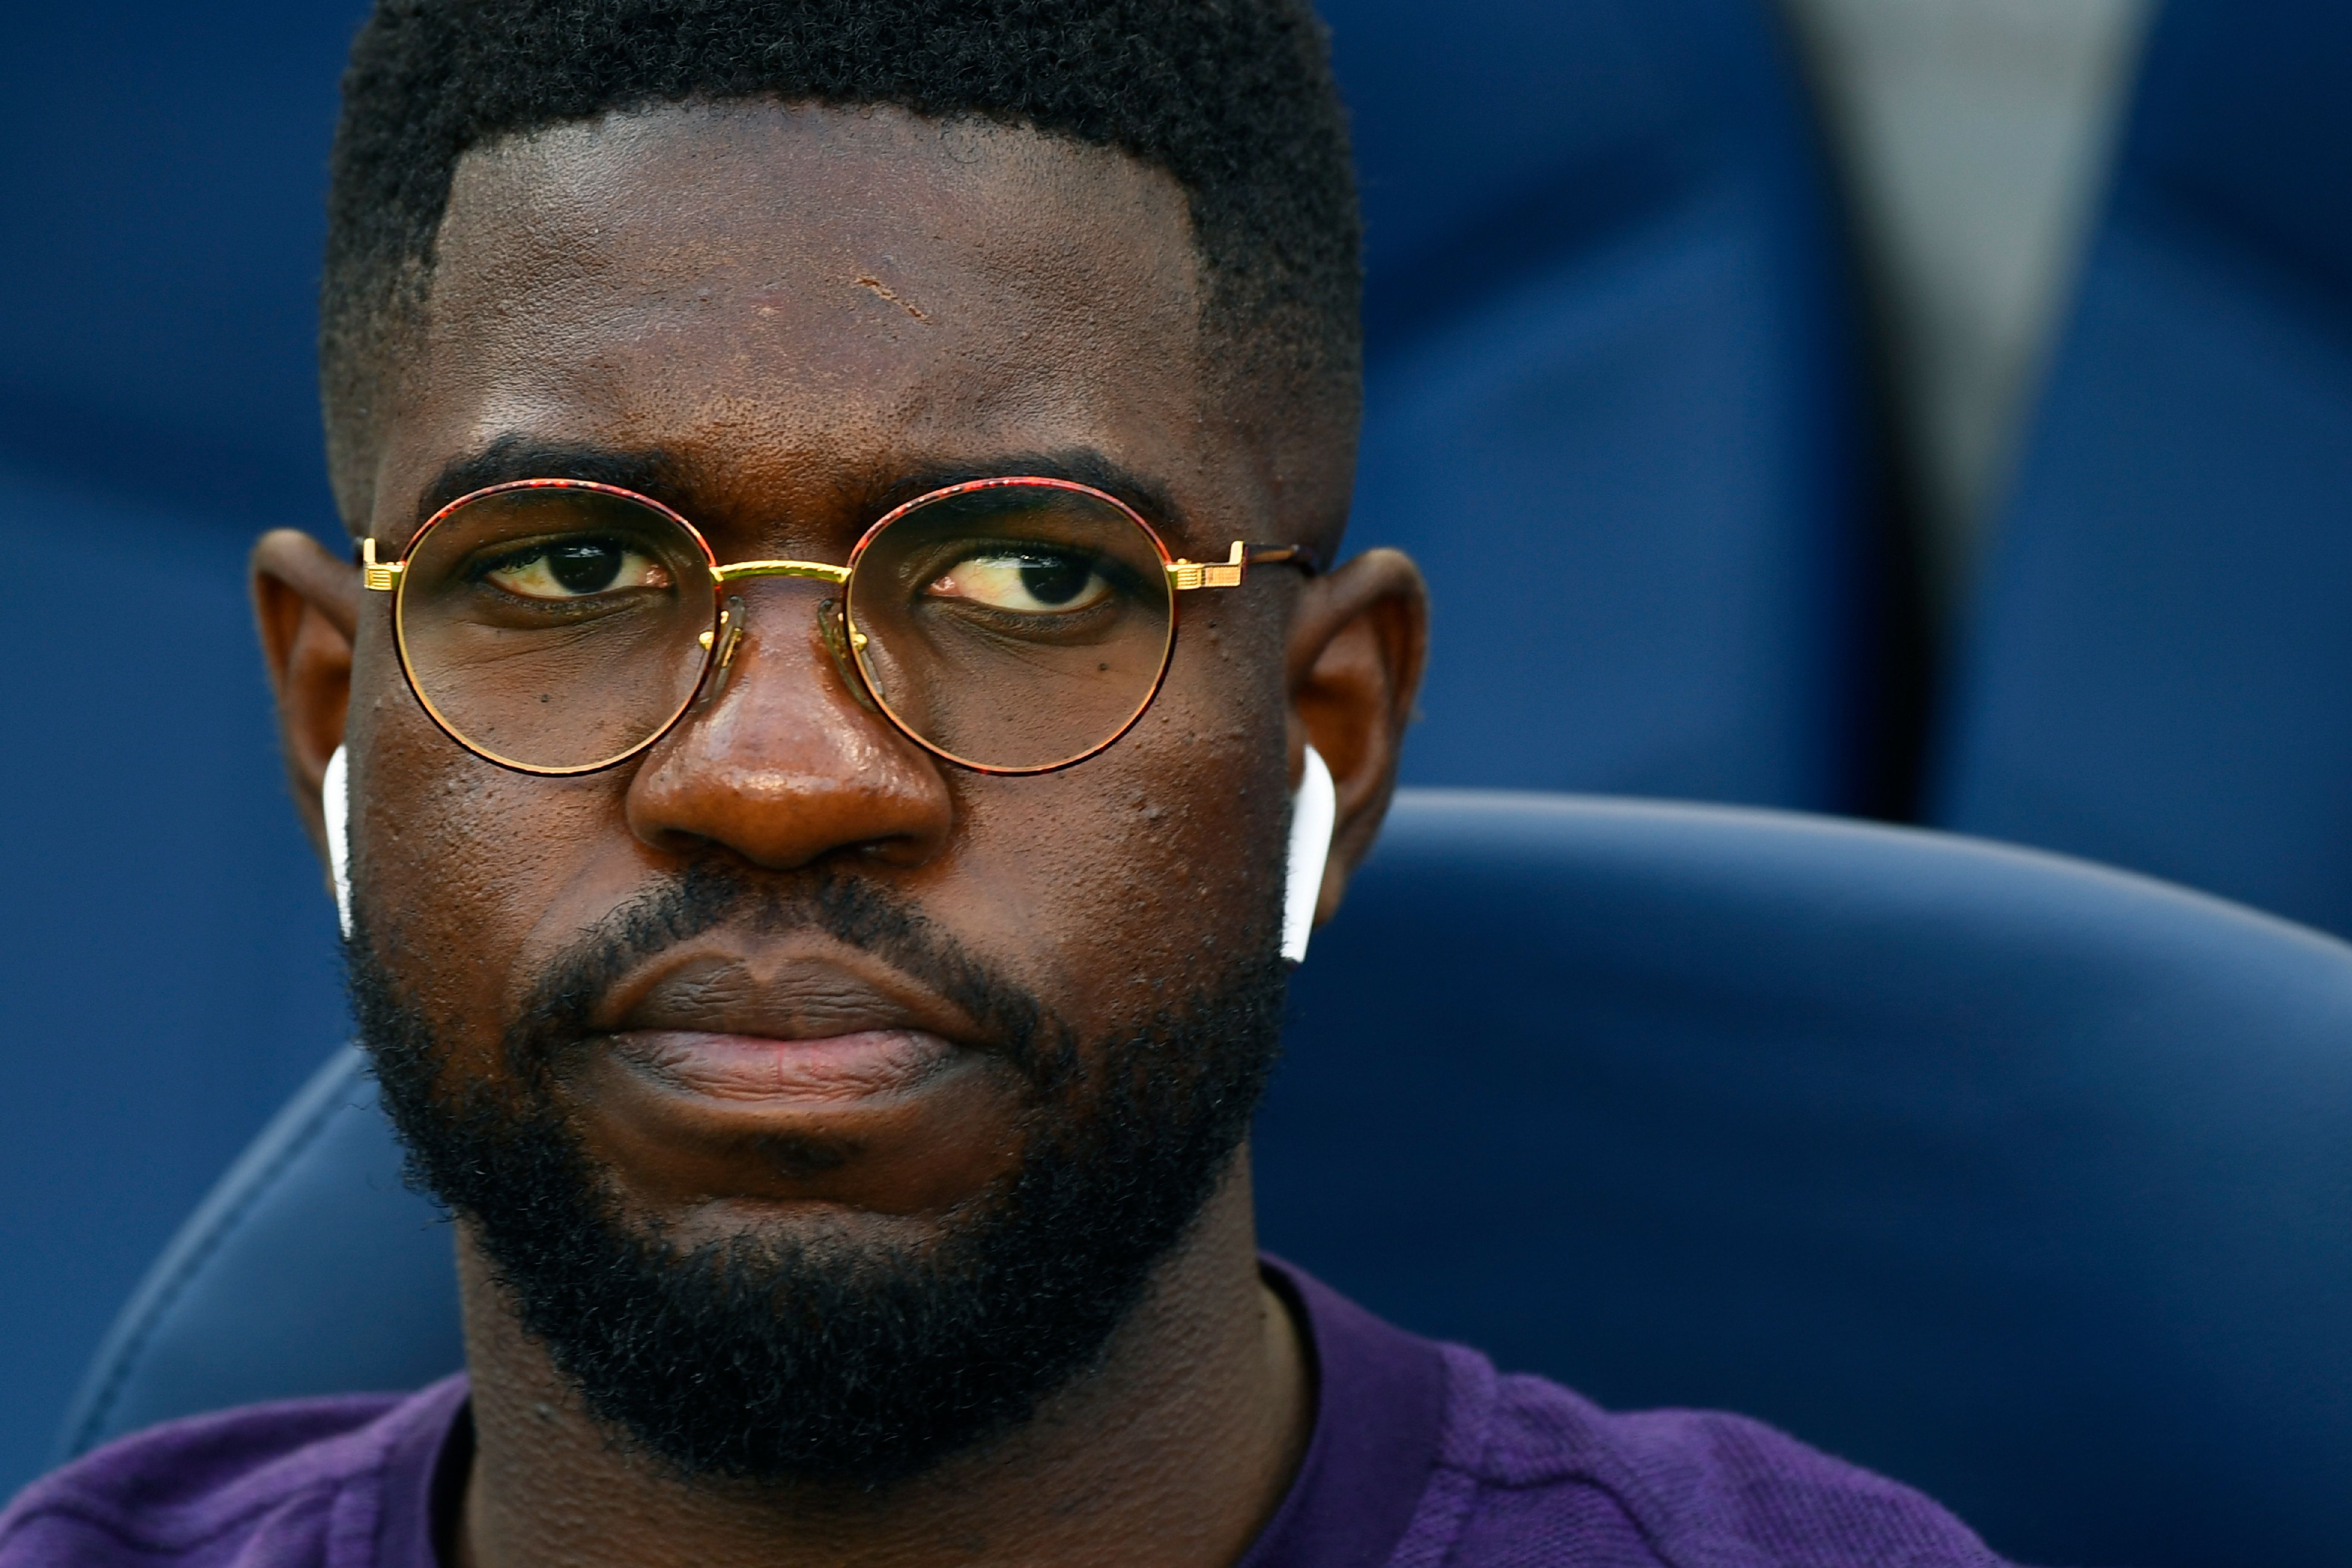 Barcelona's French defender Samuel Umtiti looks on before the Spanish league football match between Real Sociedad and FC Barcelona at the Anoeta stadium in San Sebastian on September 15, 2018. (Photo by GABRIEL BOUYS / AFP)        (Photo credit should read GABRIEL BOUYS/AFP/Getty Images)